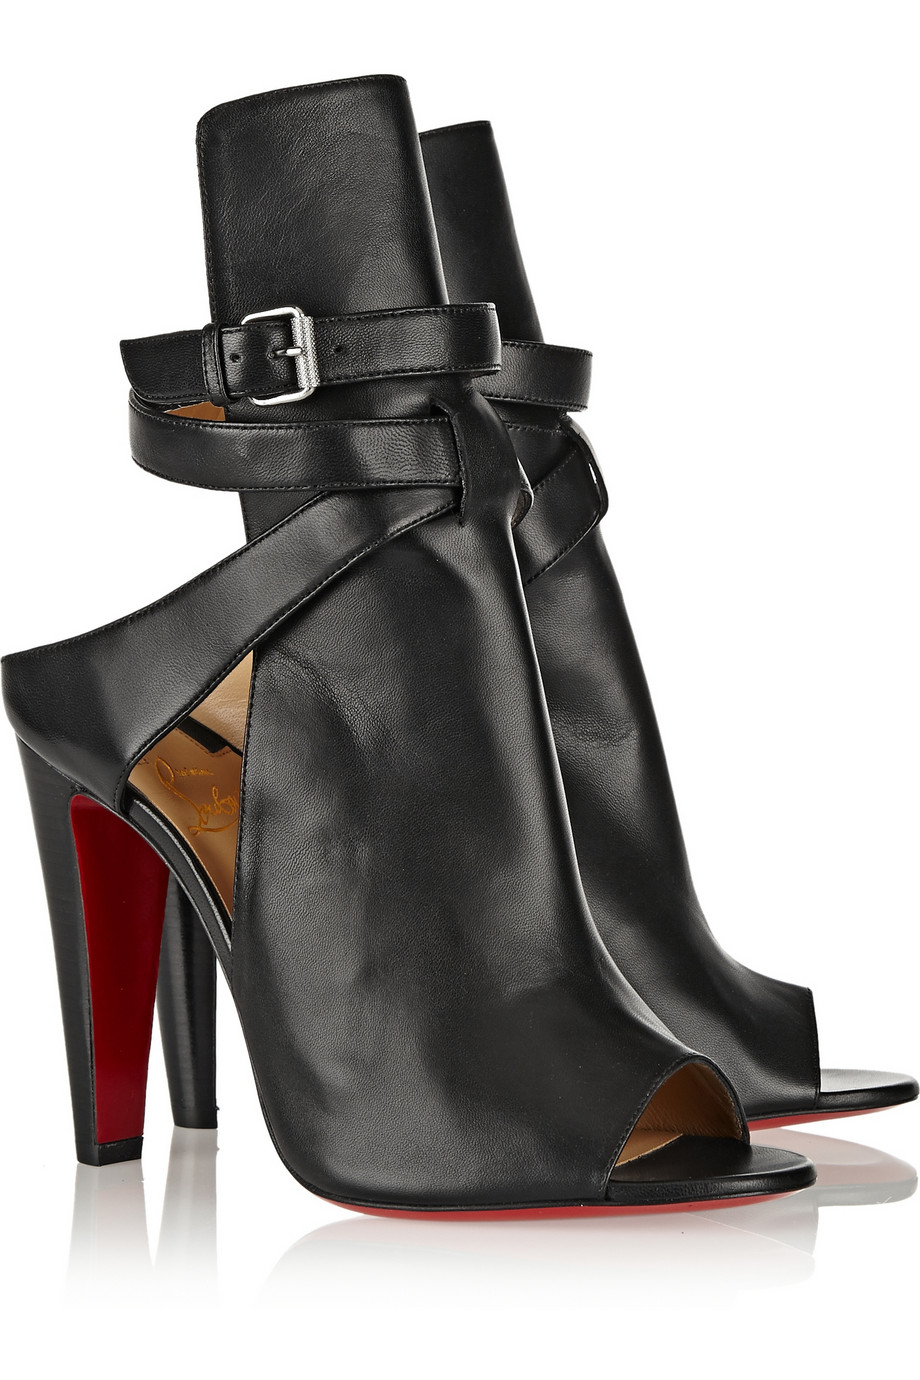 Christian Louboutin Brown Leather Cut Out Ankle Length Boots Size